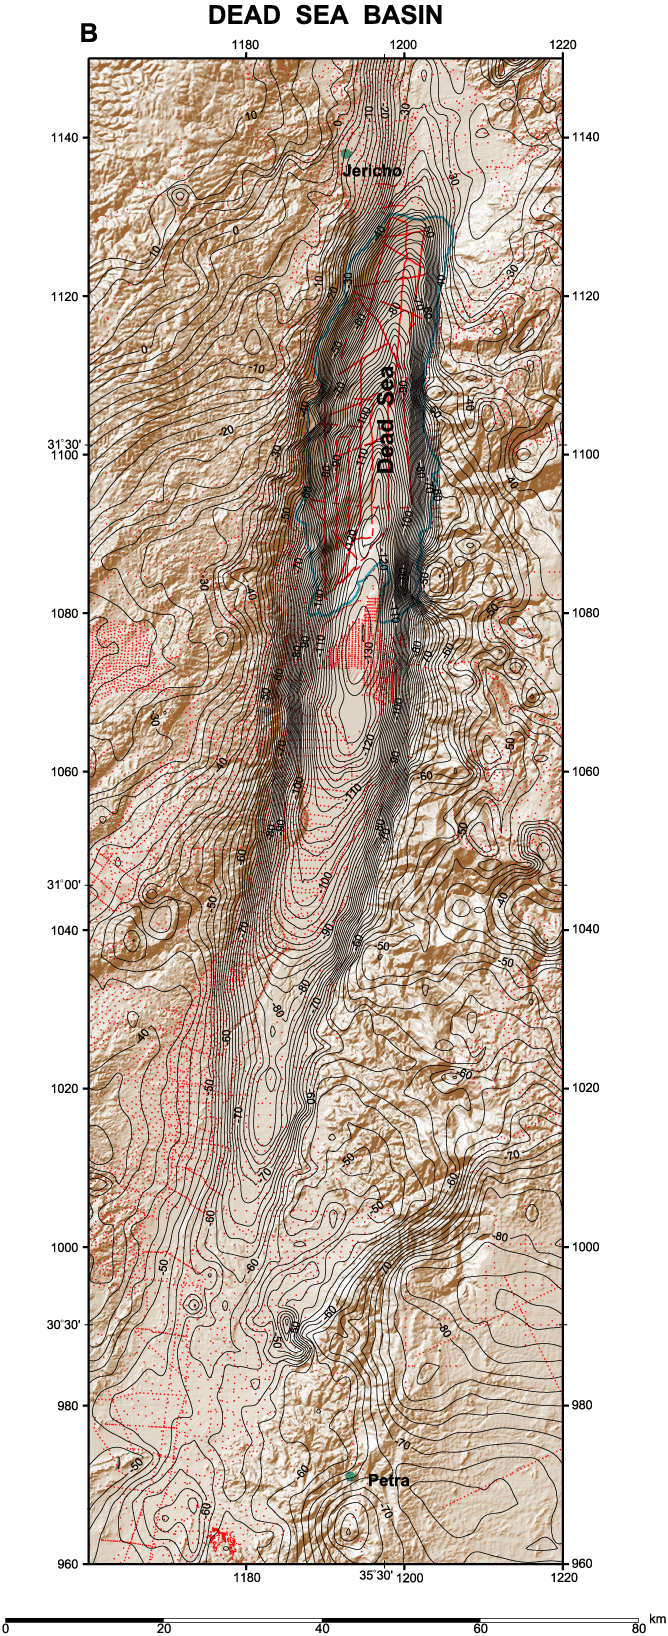 Bouguer Gravity Anomaly Map Image of the Dead Sea Fault System, Jordan and Israel, Dead Sea Basin